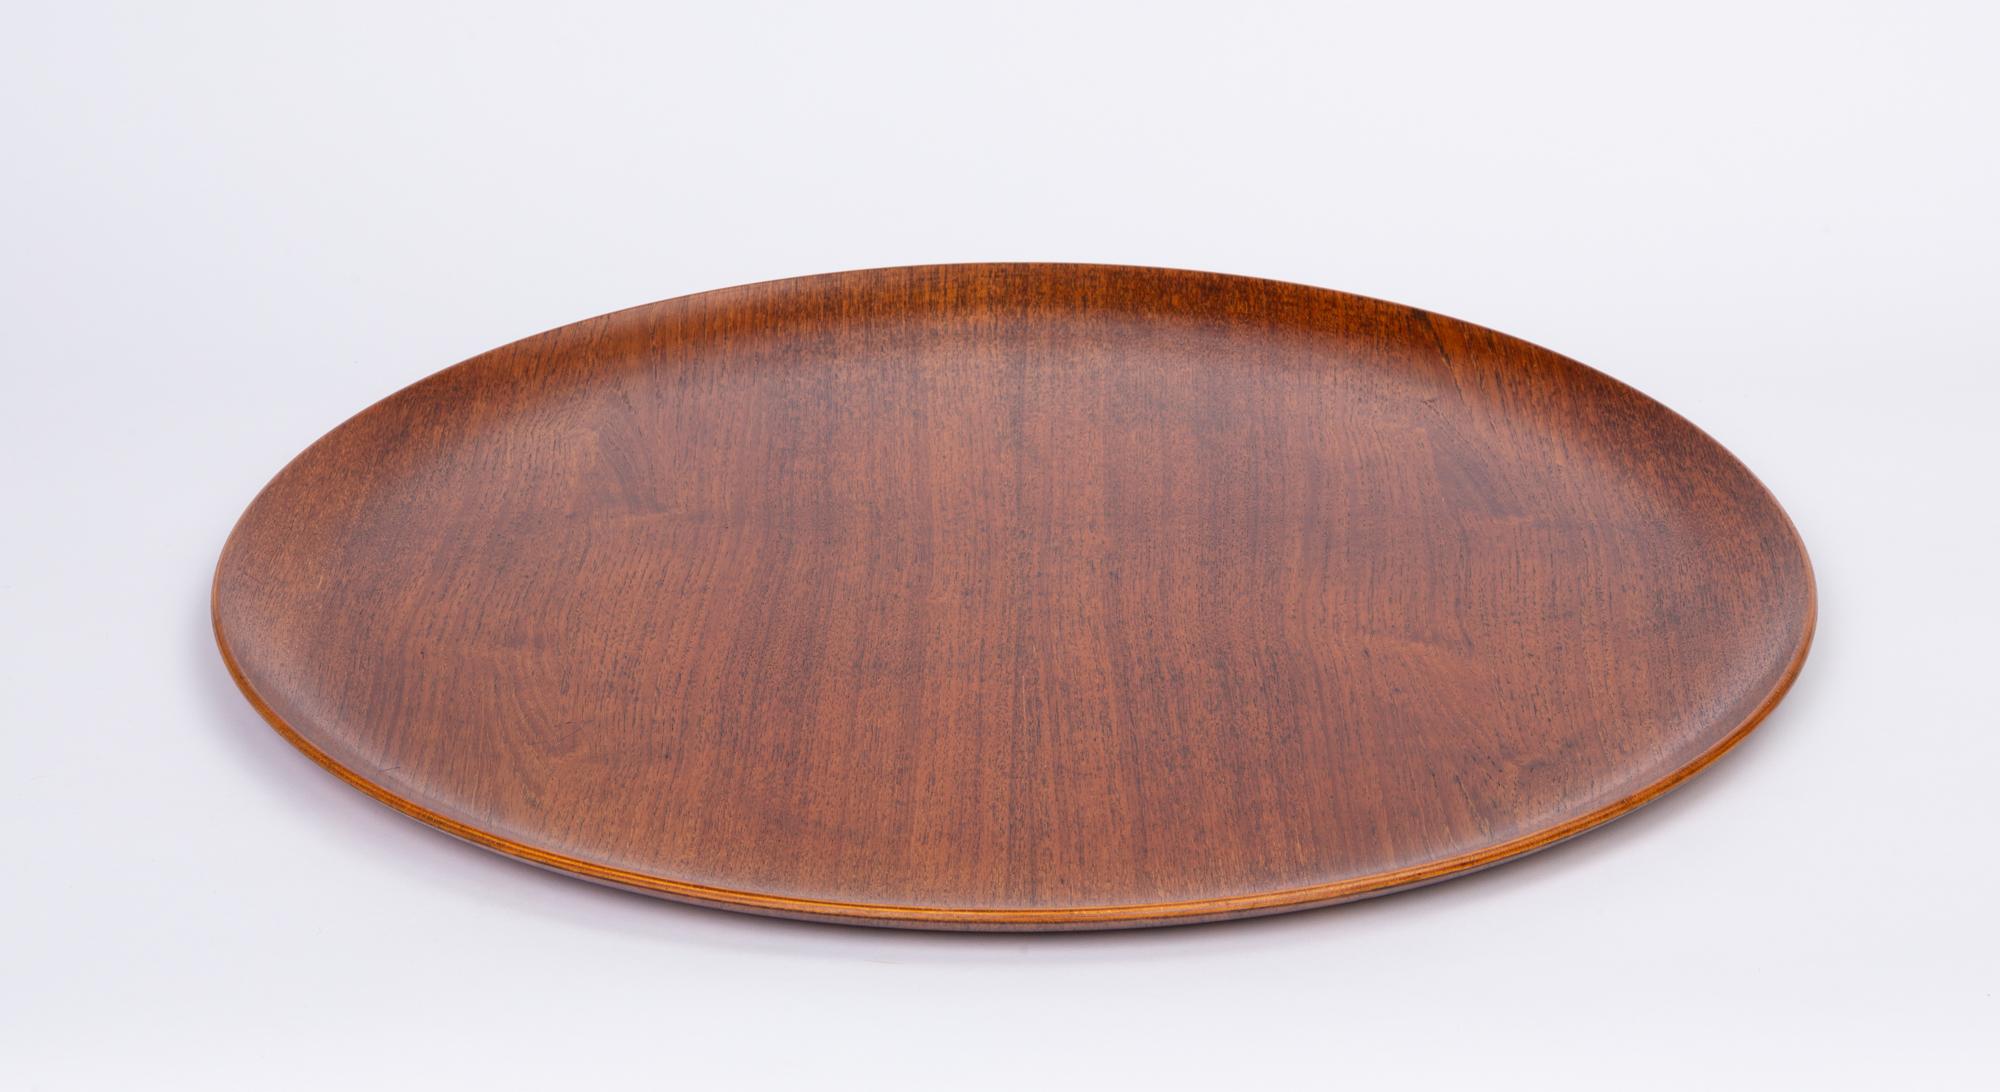 Mid-Century Modern Jens Quistgaard Style Teak Tray with Curved Edge